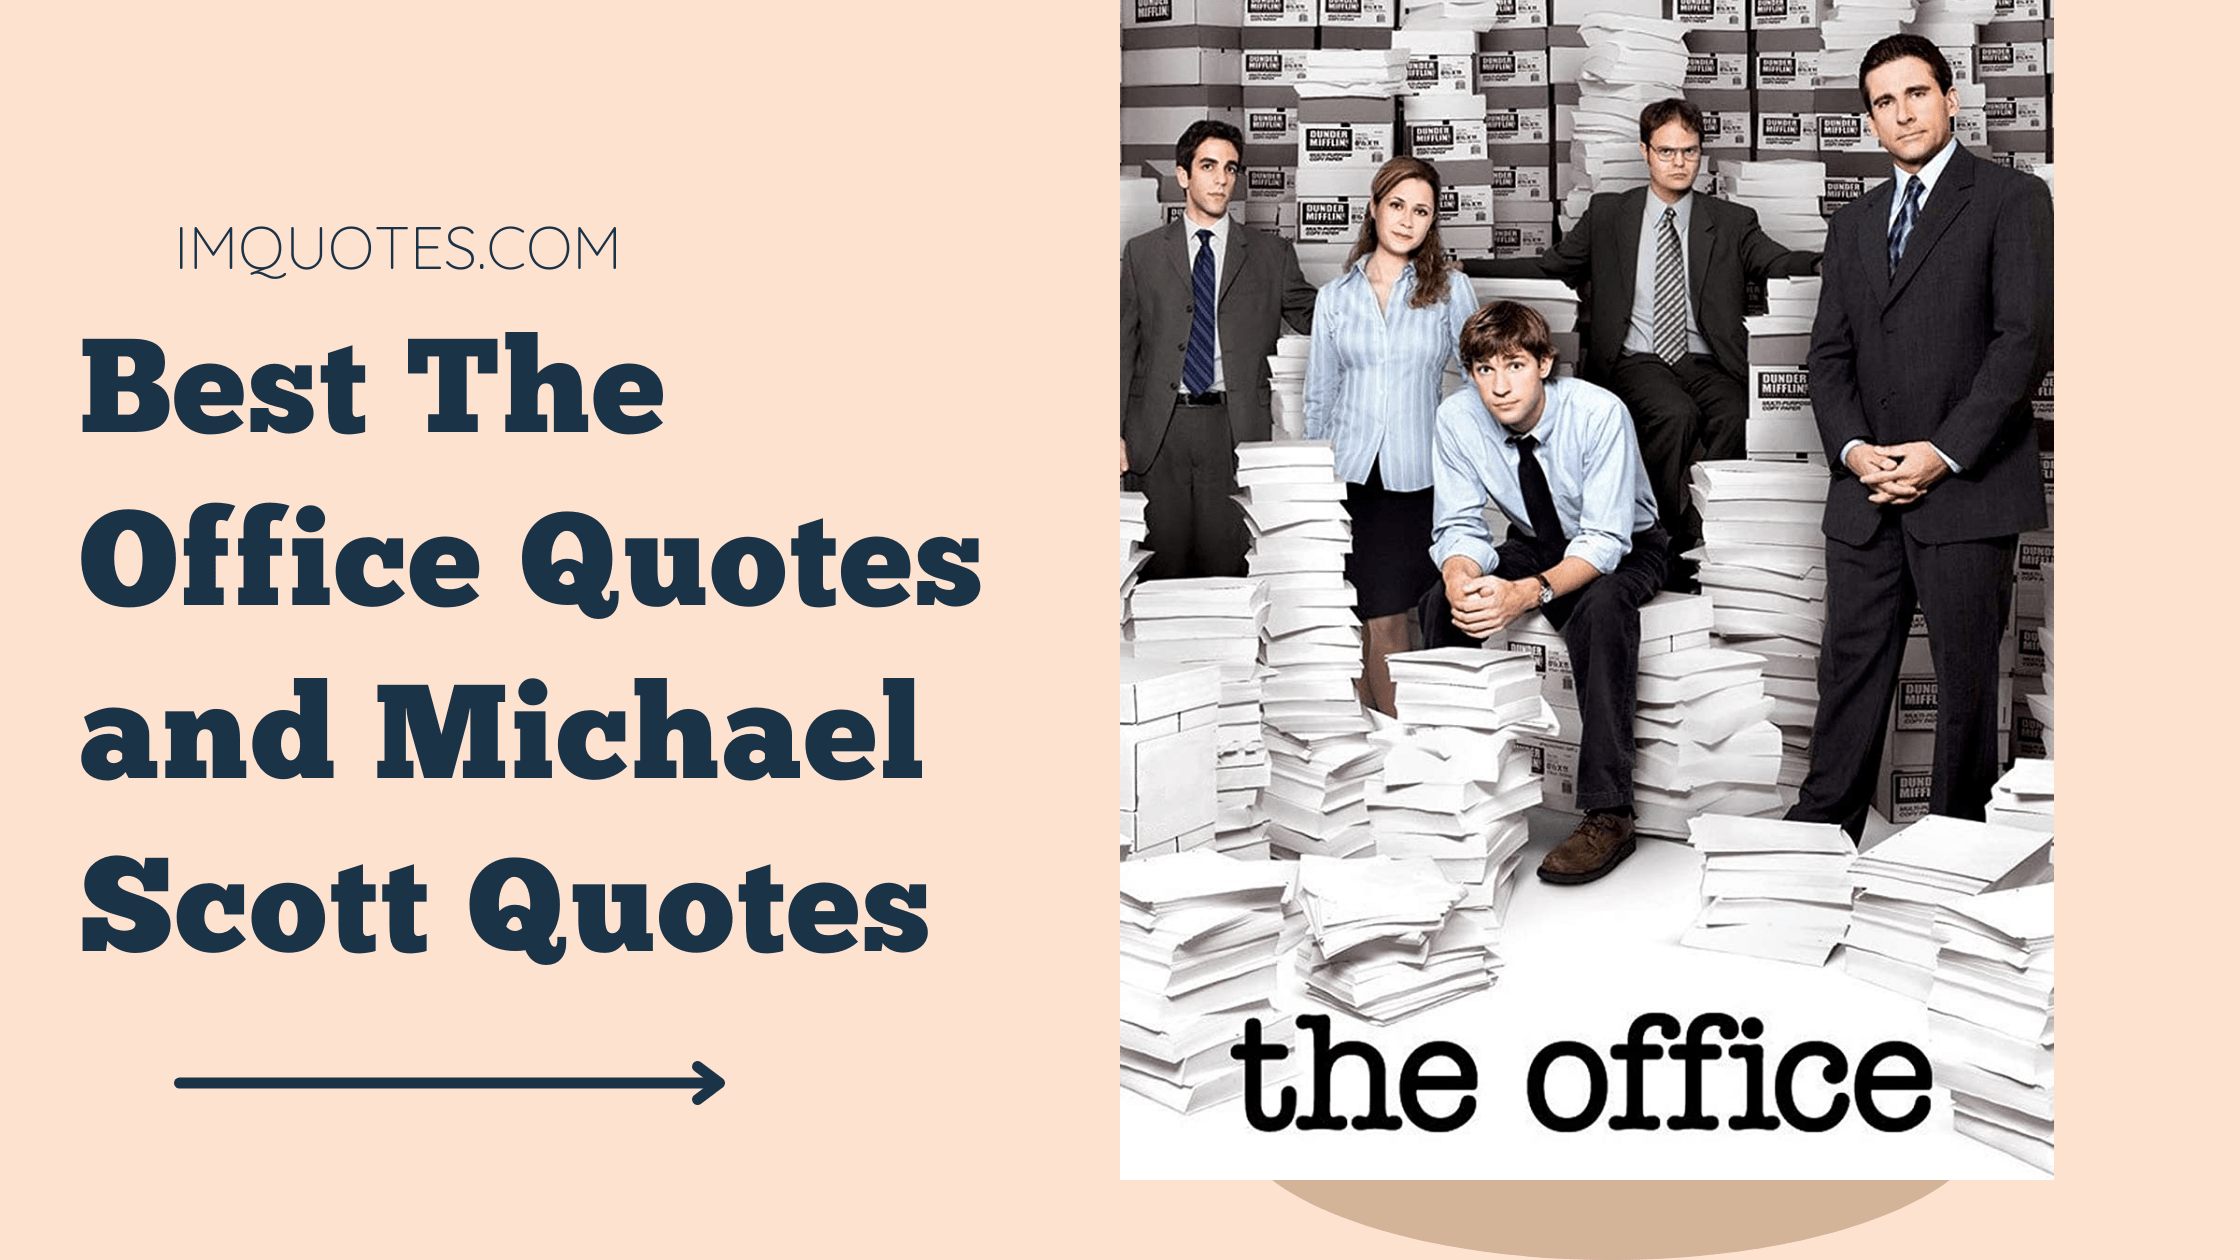 Best The Office Quotes and Michael Scott Quotes